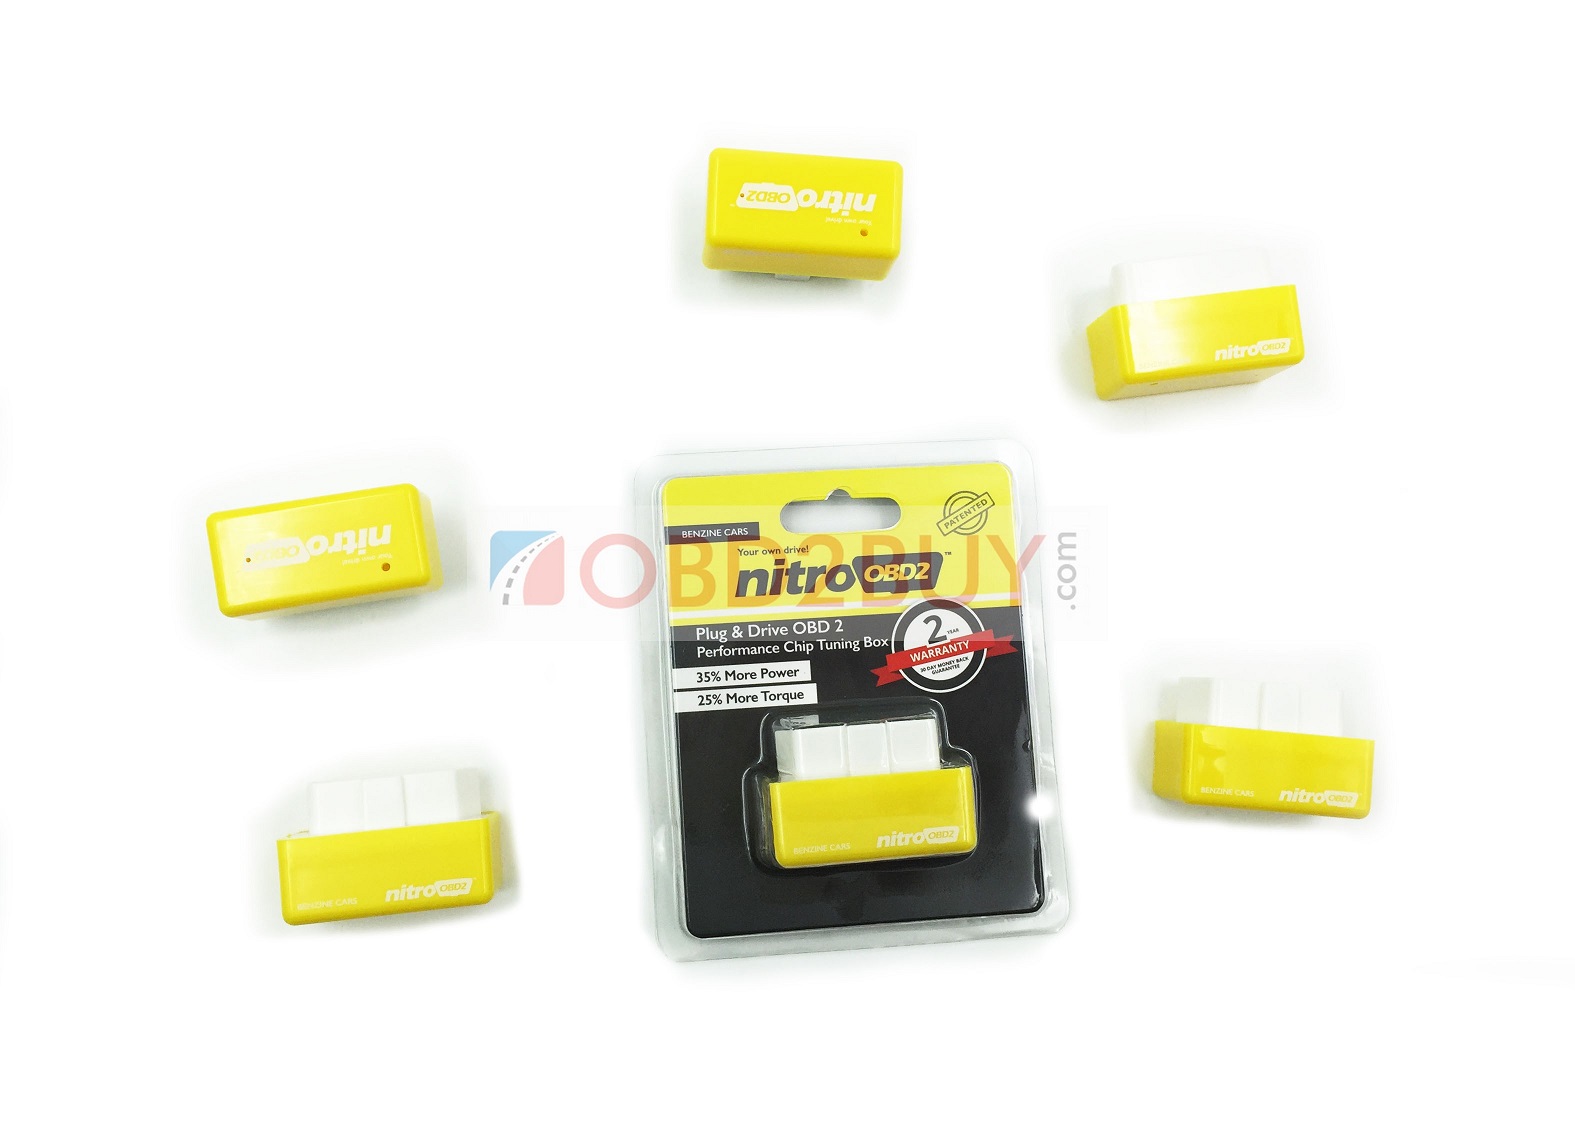 OBD2 Plug and Drive OBDII Performance Chip Tuning Box for Benzine Car Yellow TW